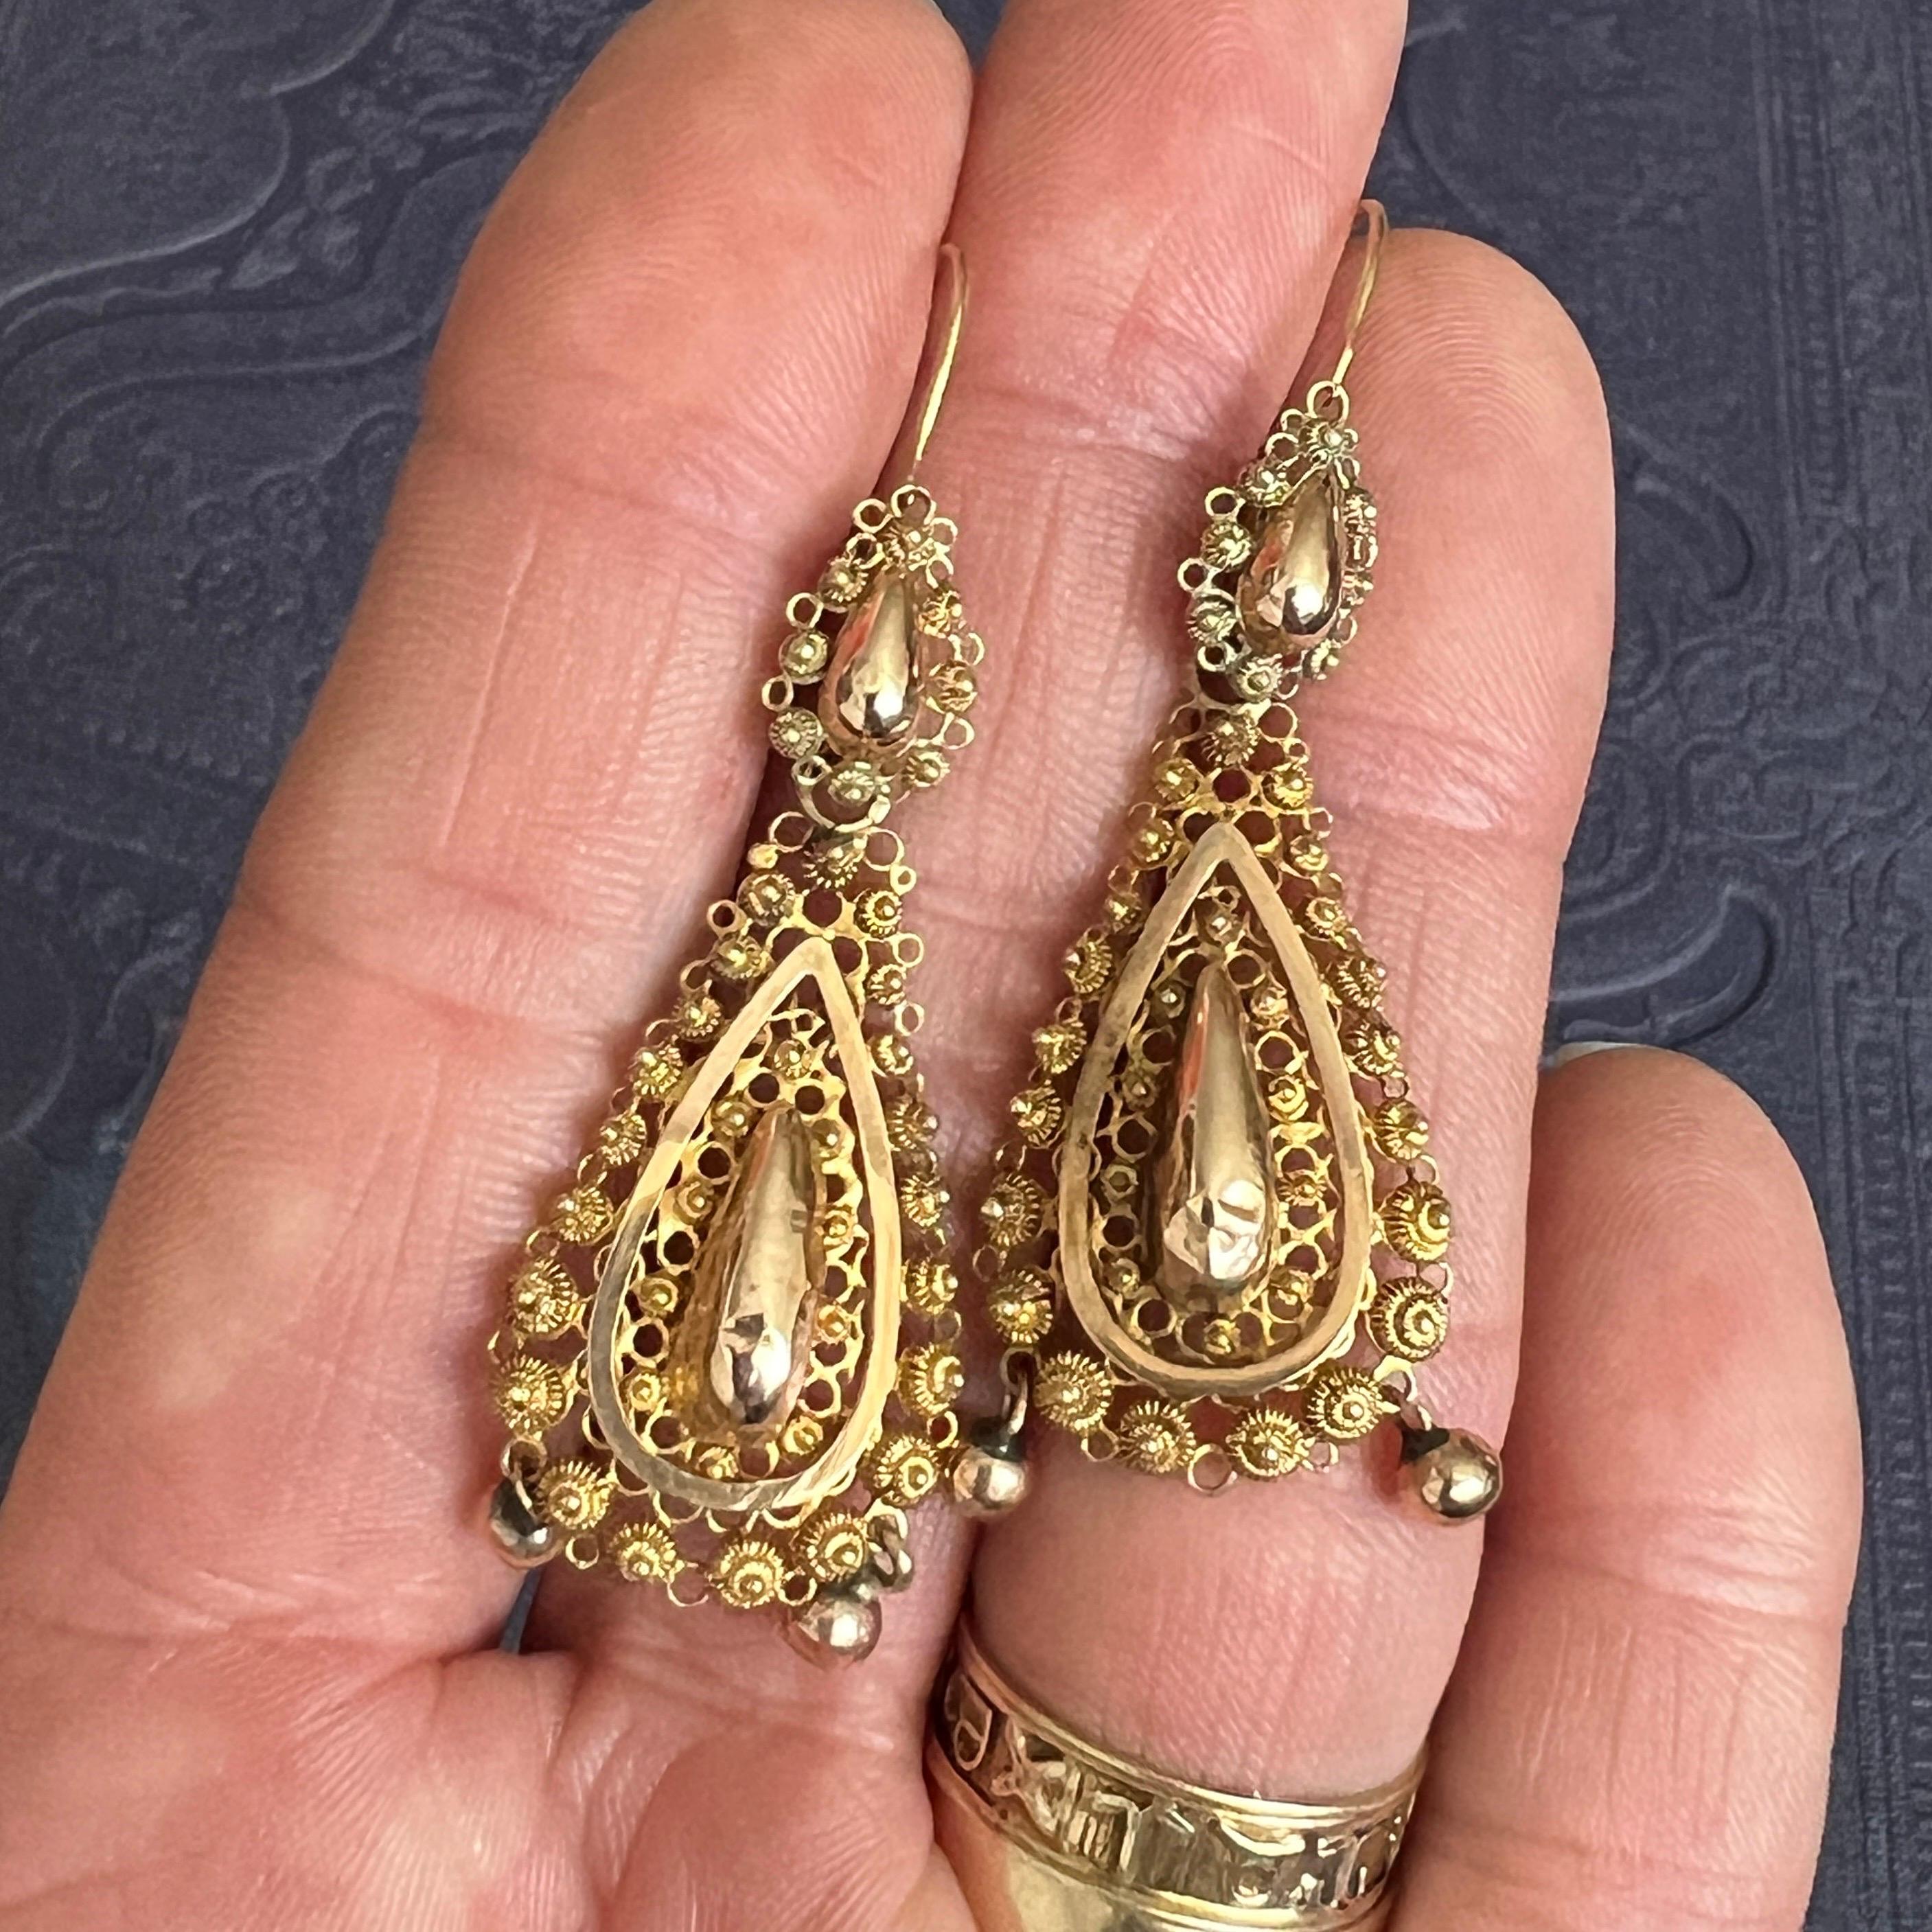 An antique pair of 14 karat gold dangle earrings crafted with a rich design of fine filigree and cannetille work. The earrings are beautifully made by hand with fine wirework and set with cannetille work which consists of small knots throughout the